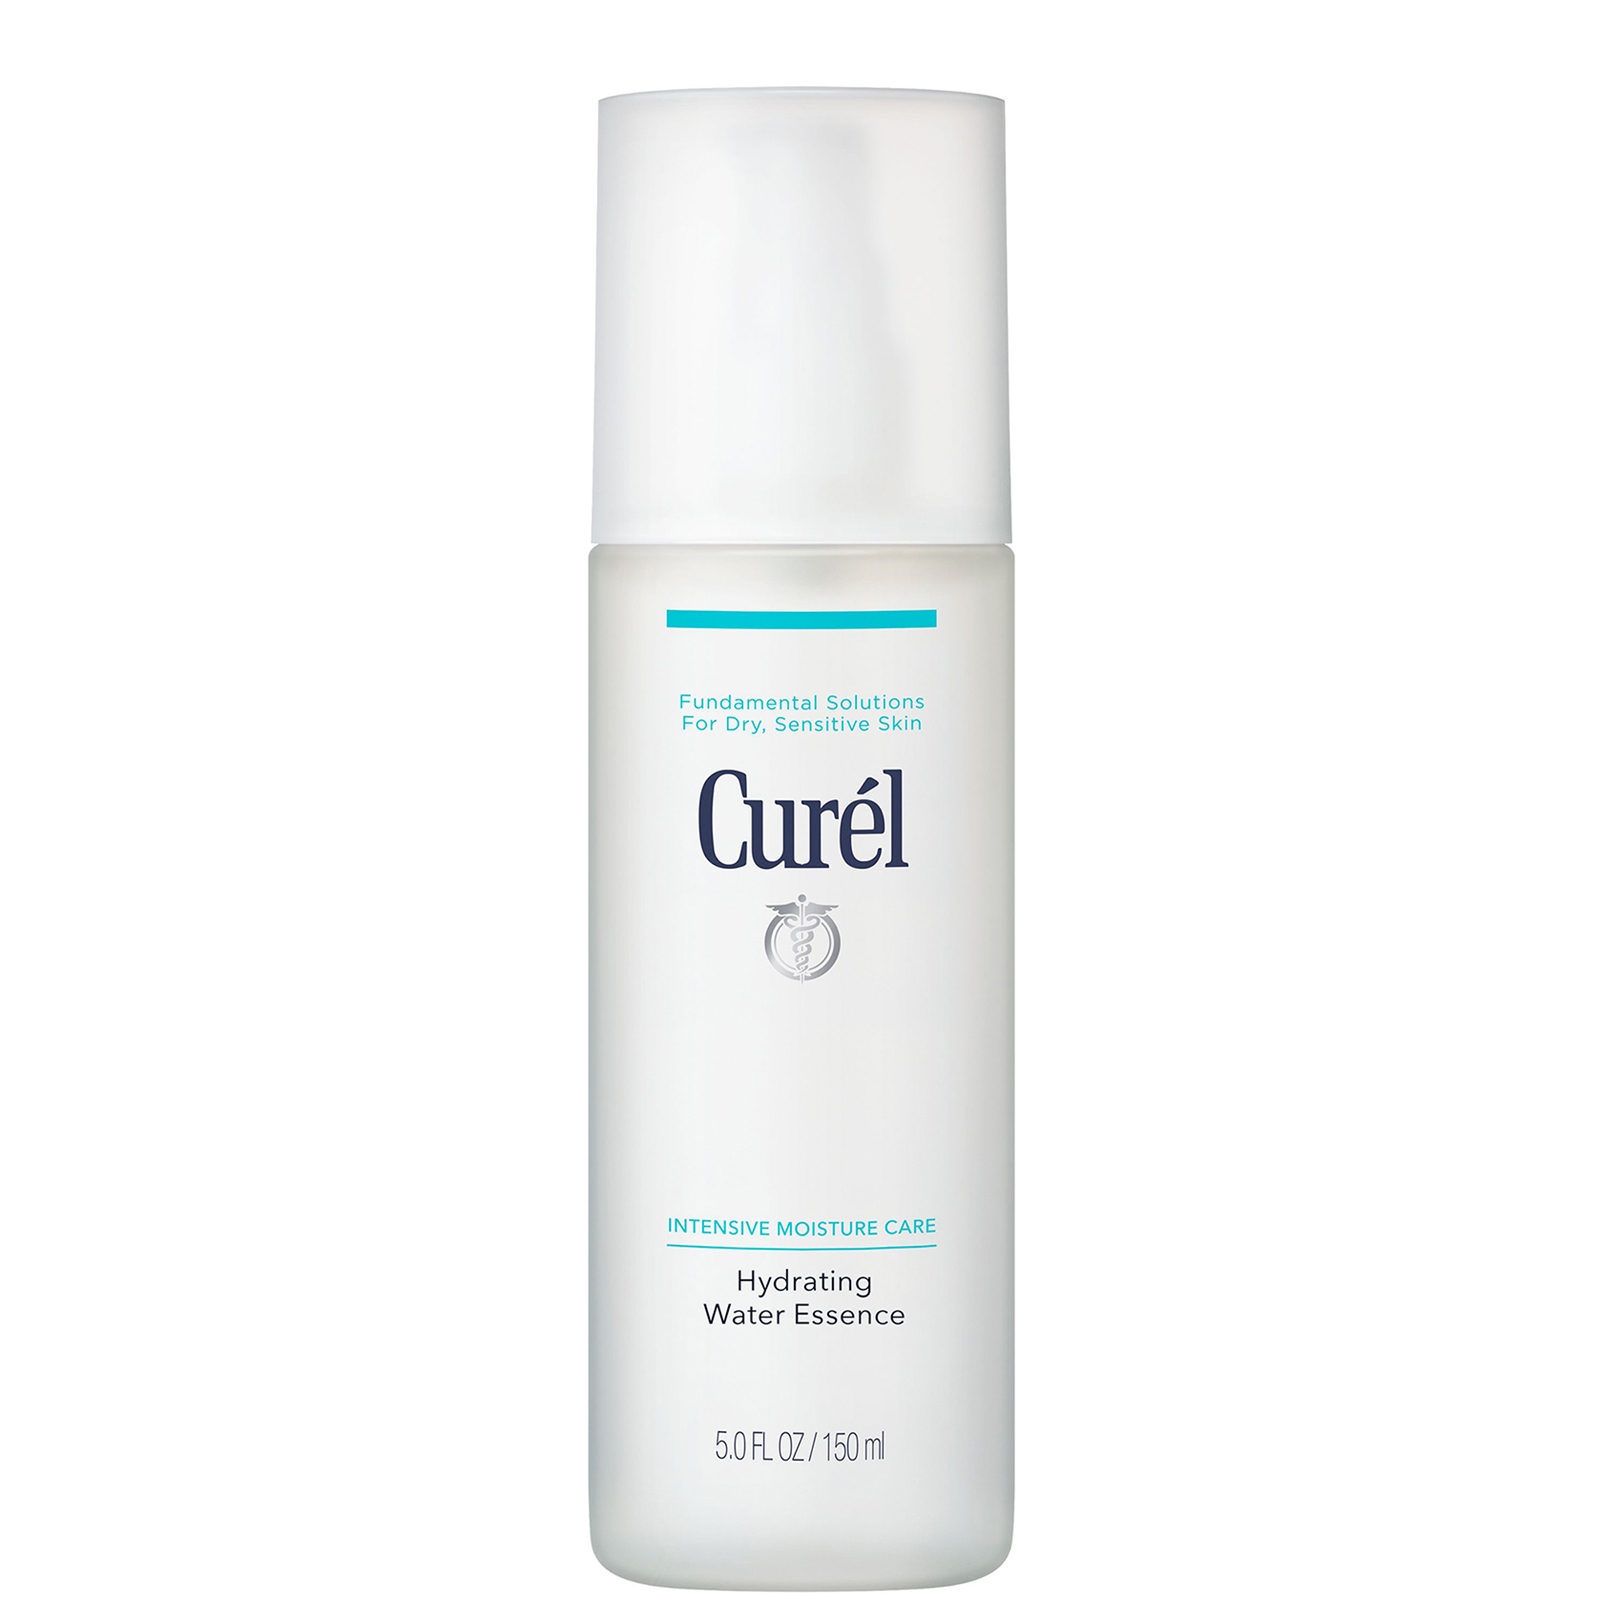 Image of Curél Hydrating Water Essence for Dry, Sensitive Skin 150ml